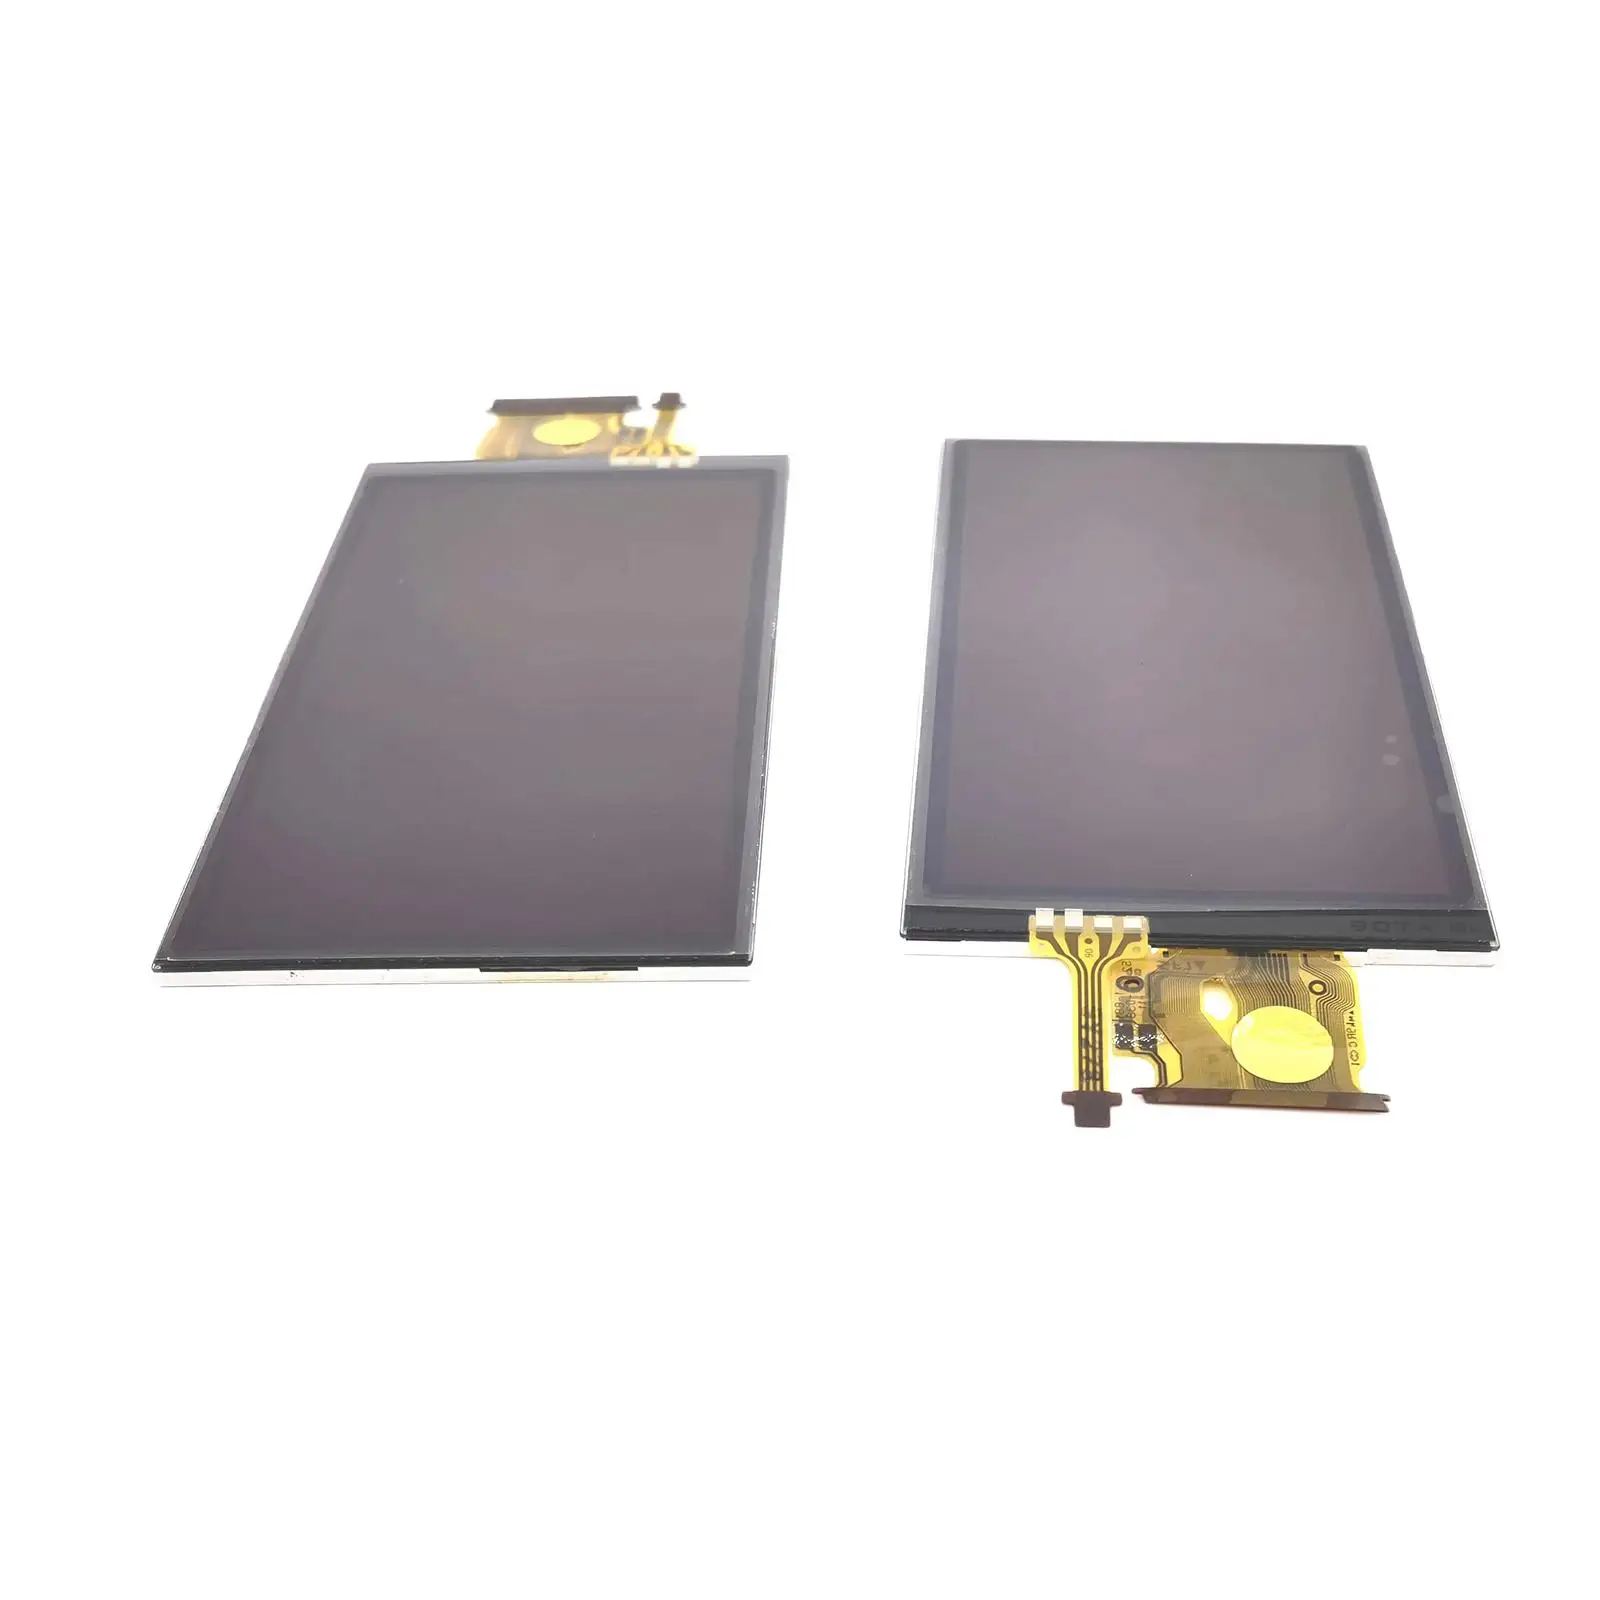 Professional Replacement LCD Display Screen with Touch Replace Repair Part Durable for Dsc-Tx7 TX9C TX9 TX7C XR550